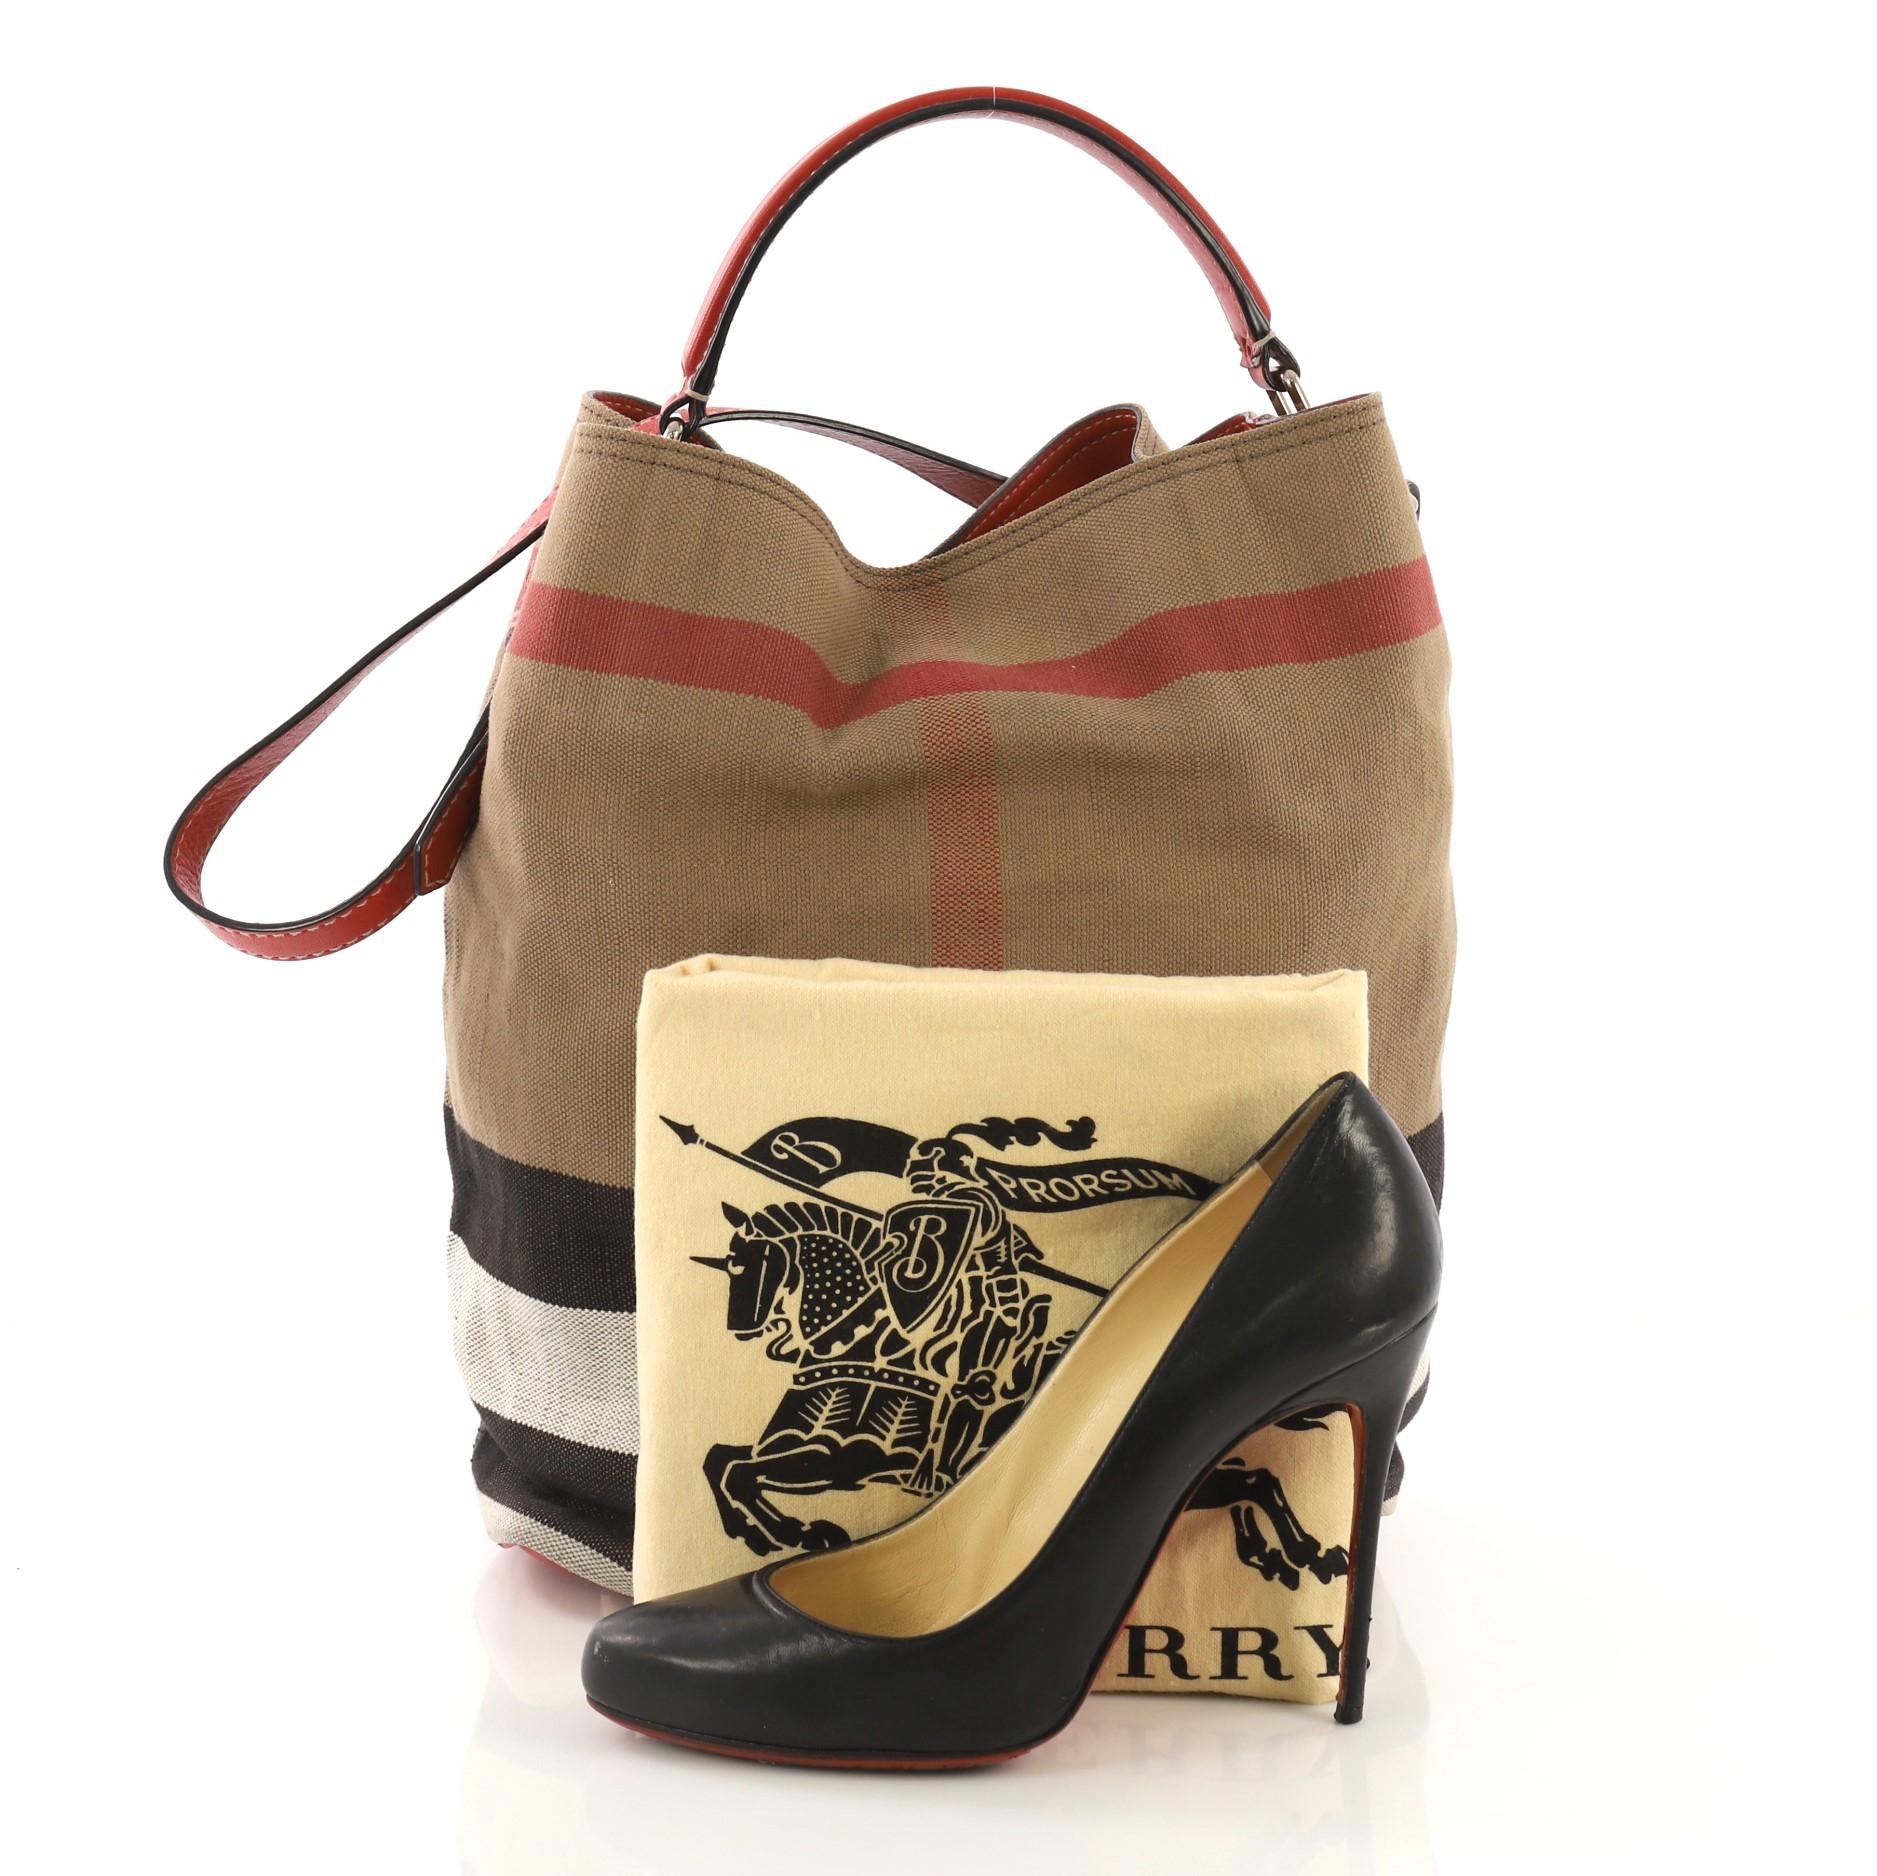 This Burberry Ashby Handbag House Check Canvas Medium, crafted in multicolor house check canvas and red leather, features a single looped leather handle, and gold-tone hardware. Its magnetic snap closure opens to a red leather interior. **Note: Shoe